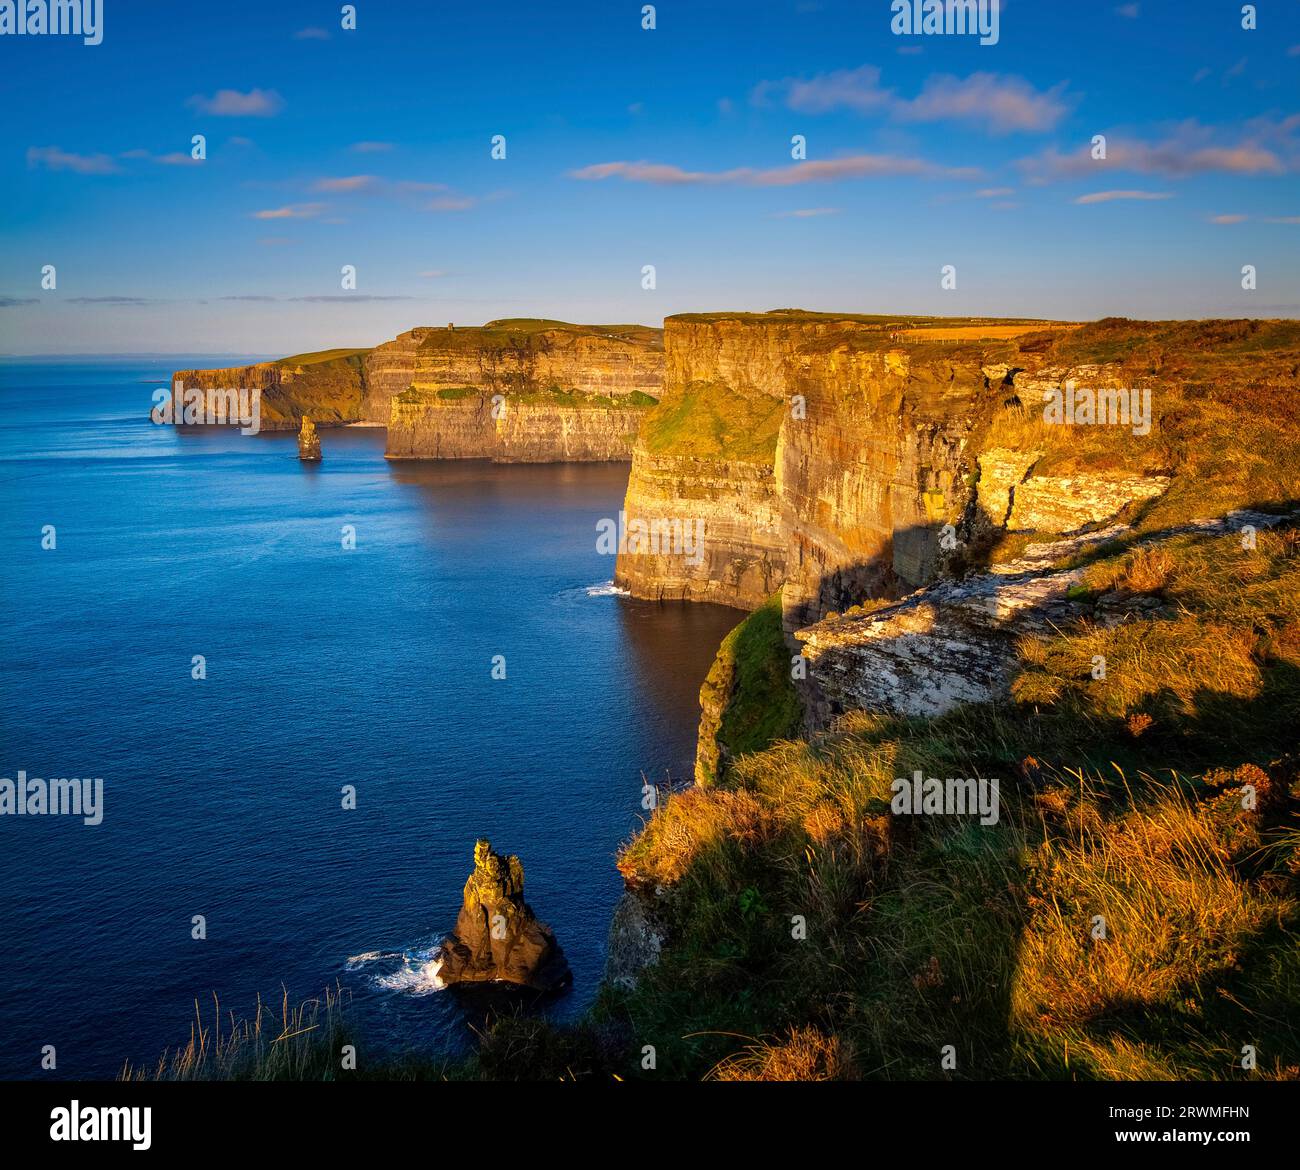 Sunset at the Cliffs of Moher, County Clare, Ireland Stock Photo